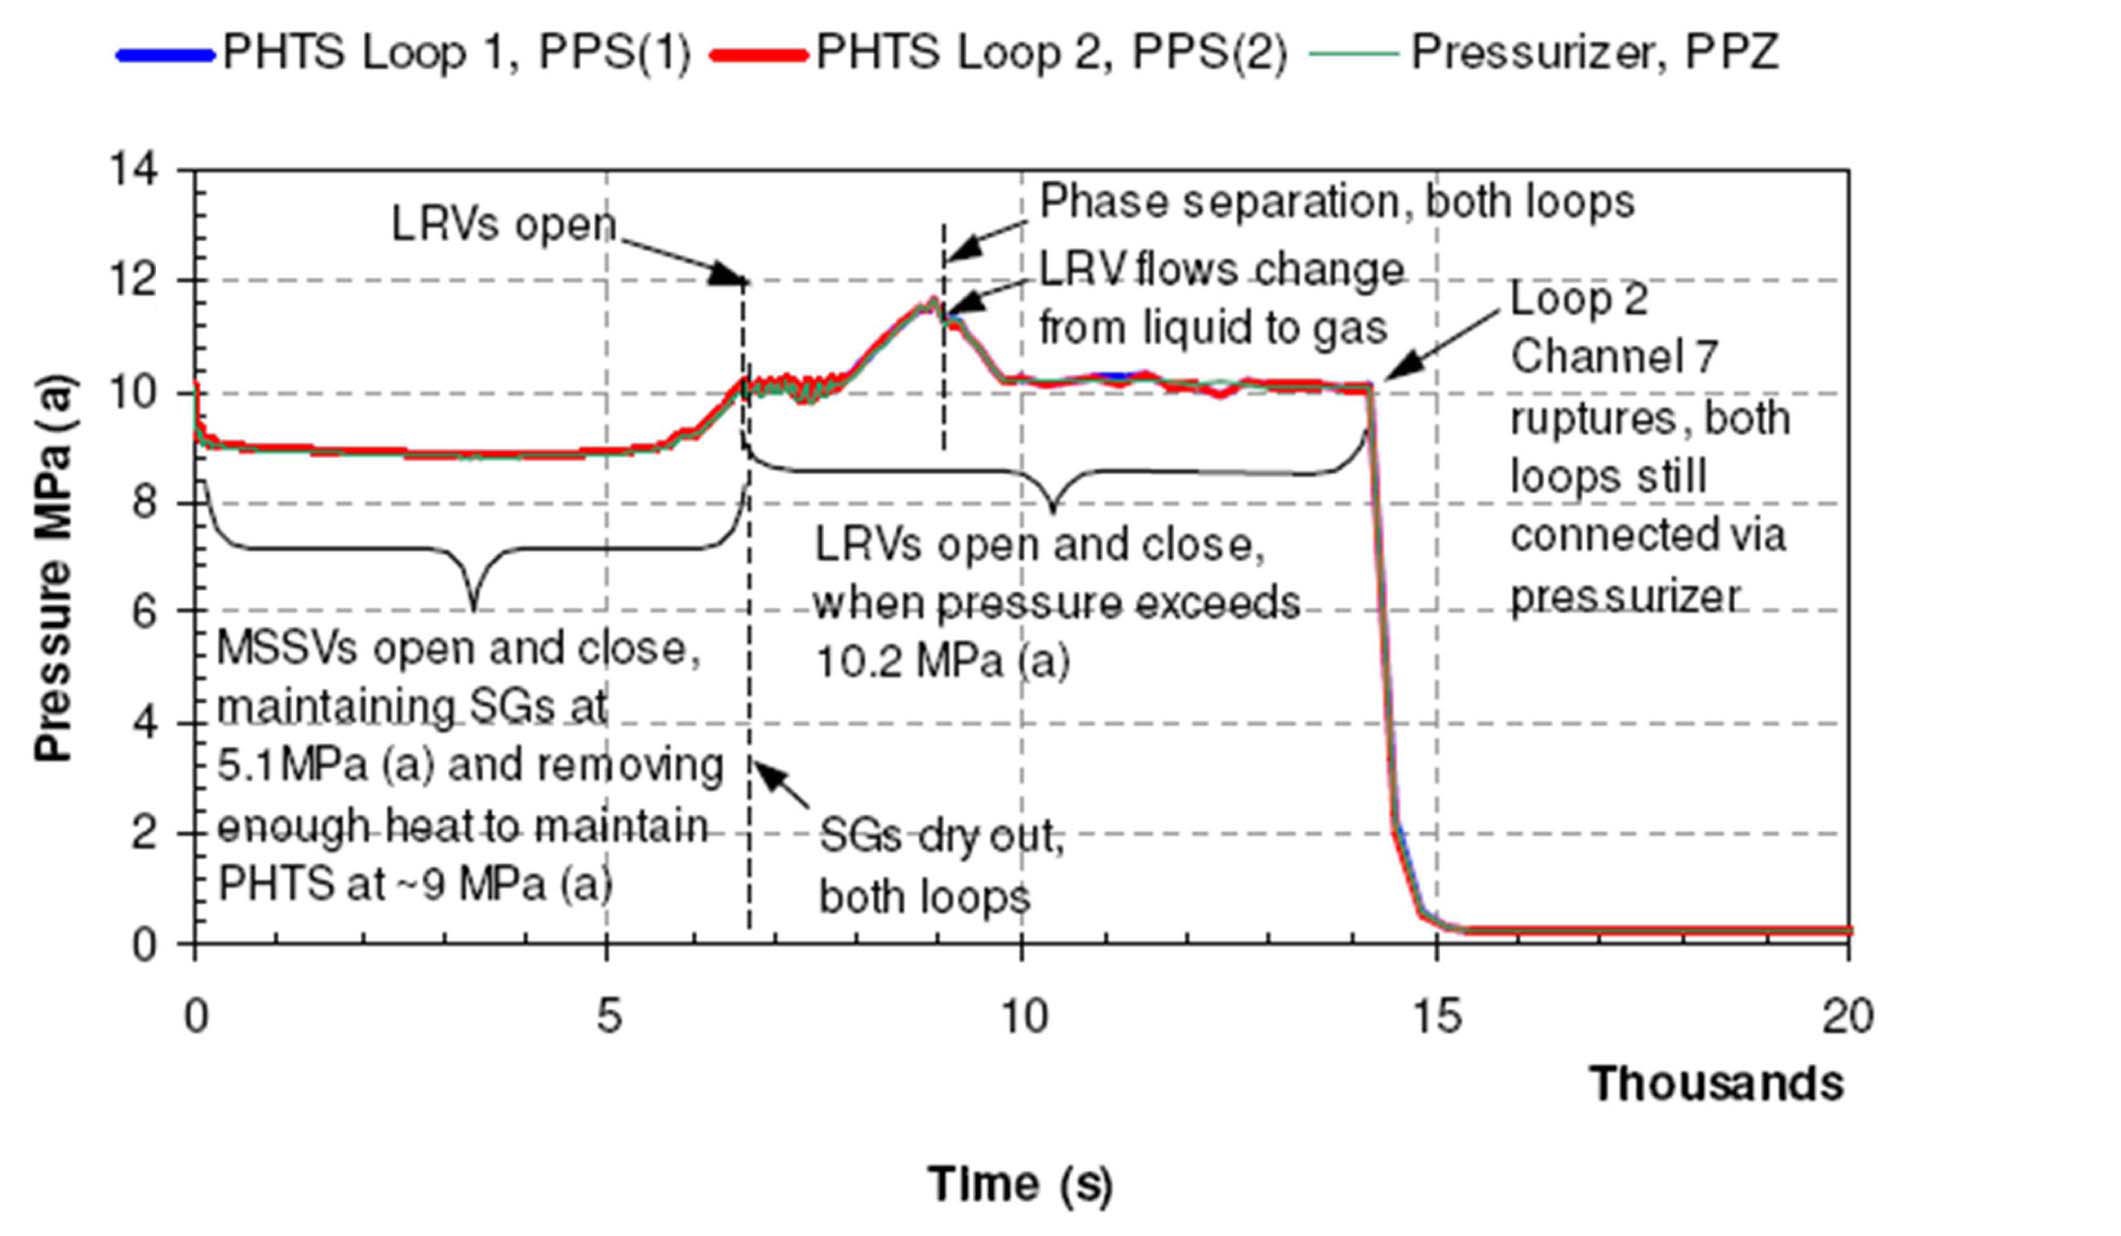 The Primary Heat Transport System Pressure in a
Generic CANDU 6 Reactor Following a Postulated Station
Blackout Event